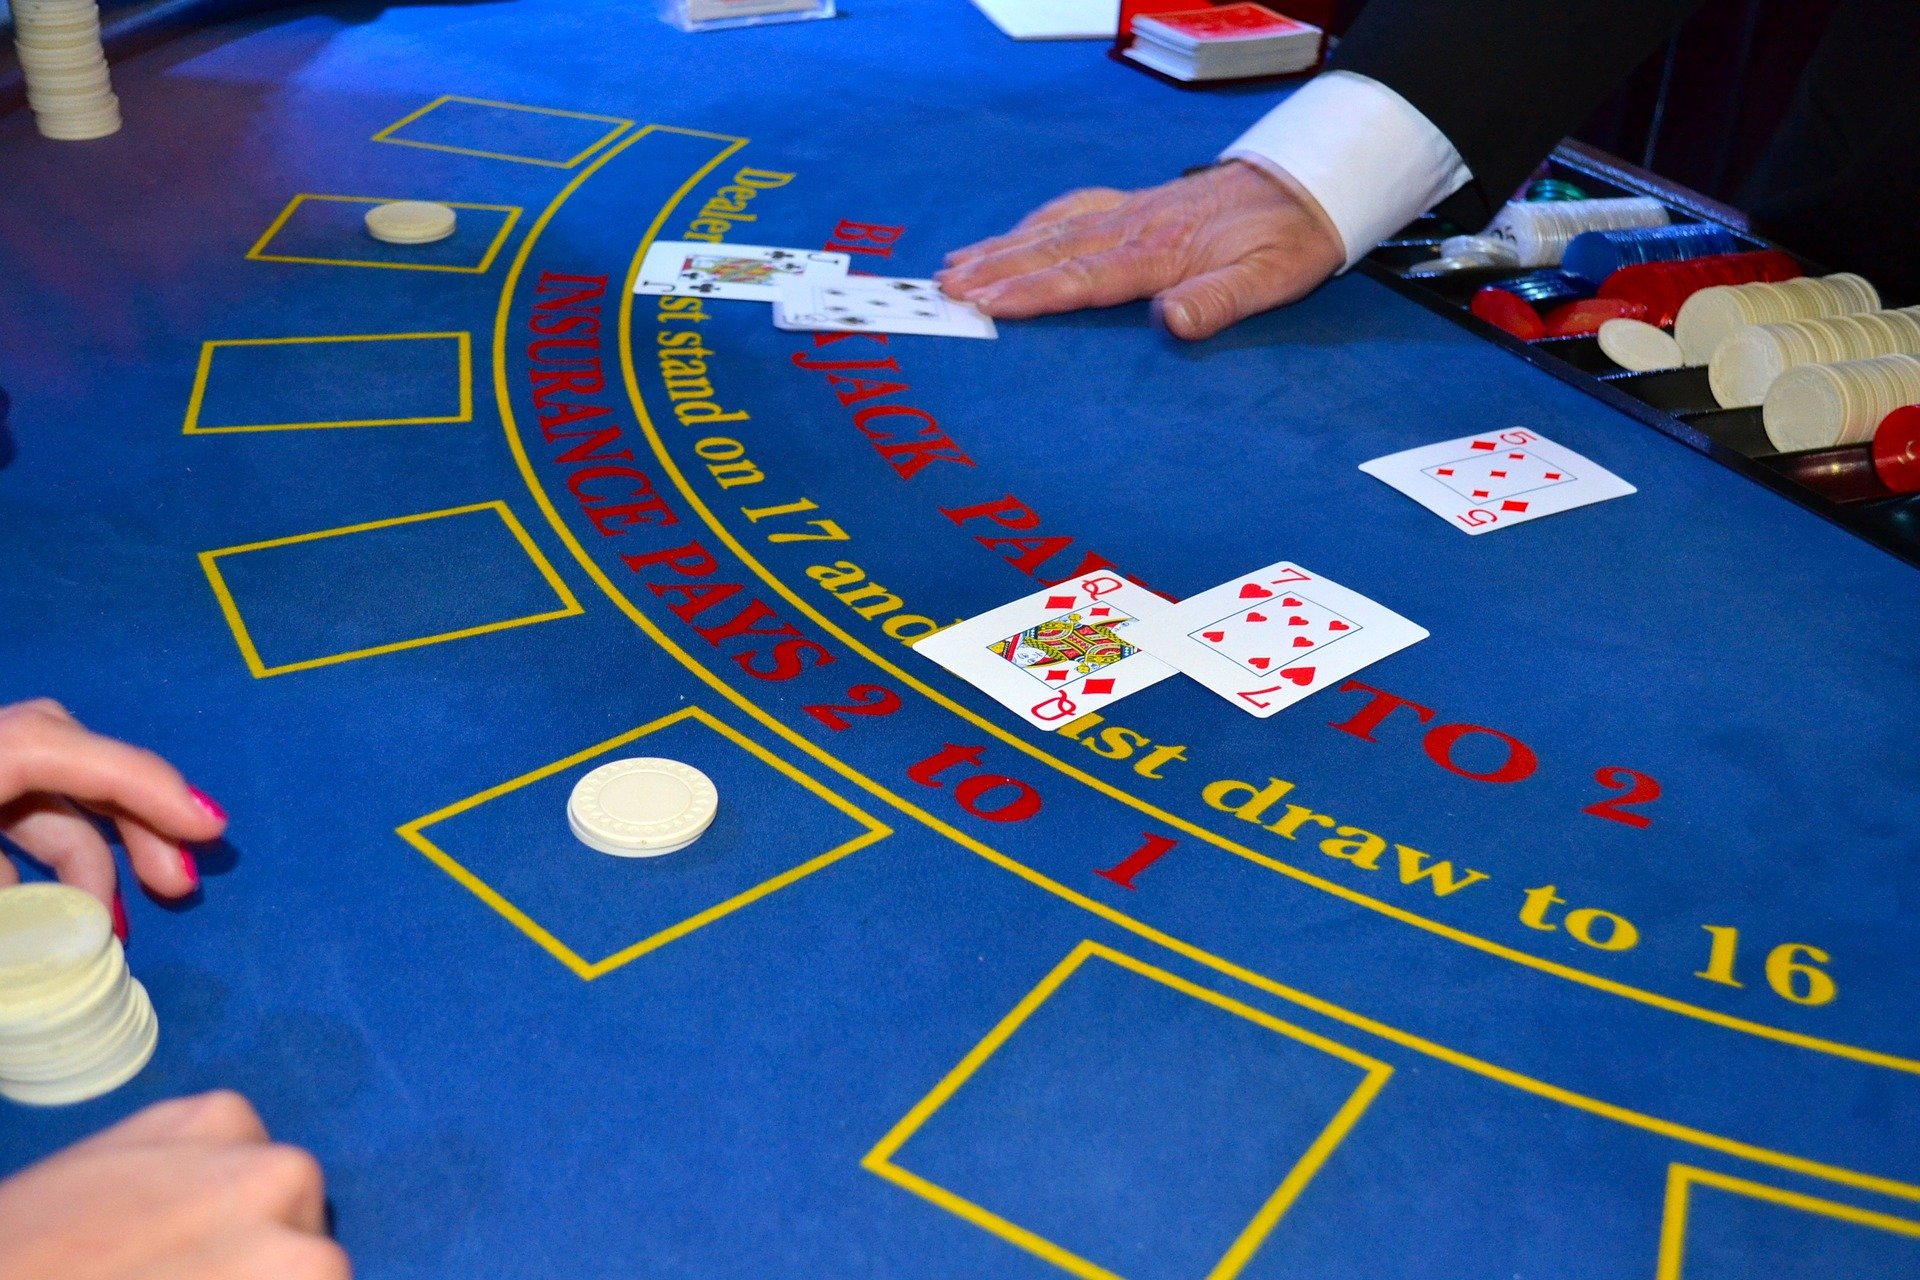 There are great blackjack varietion you can cash in on